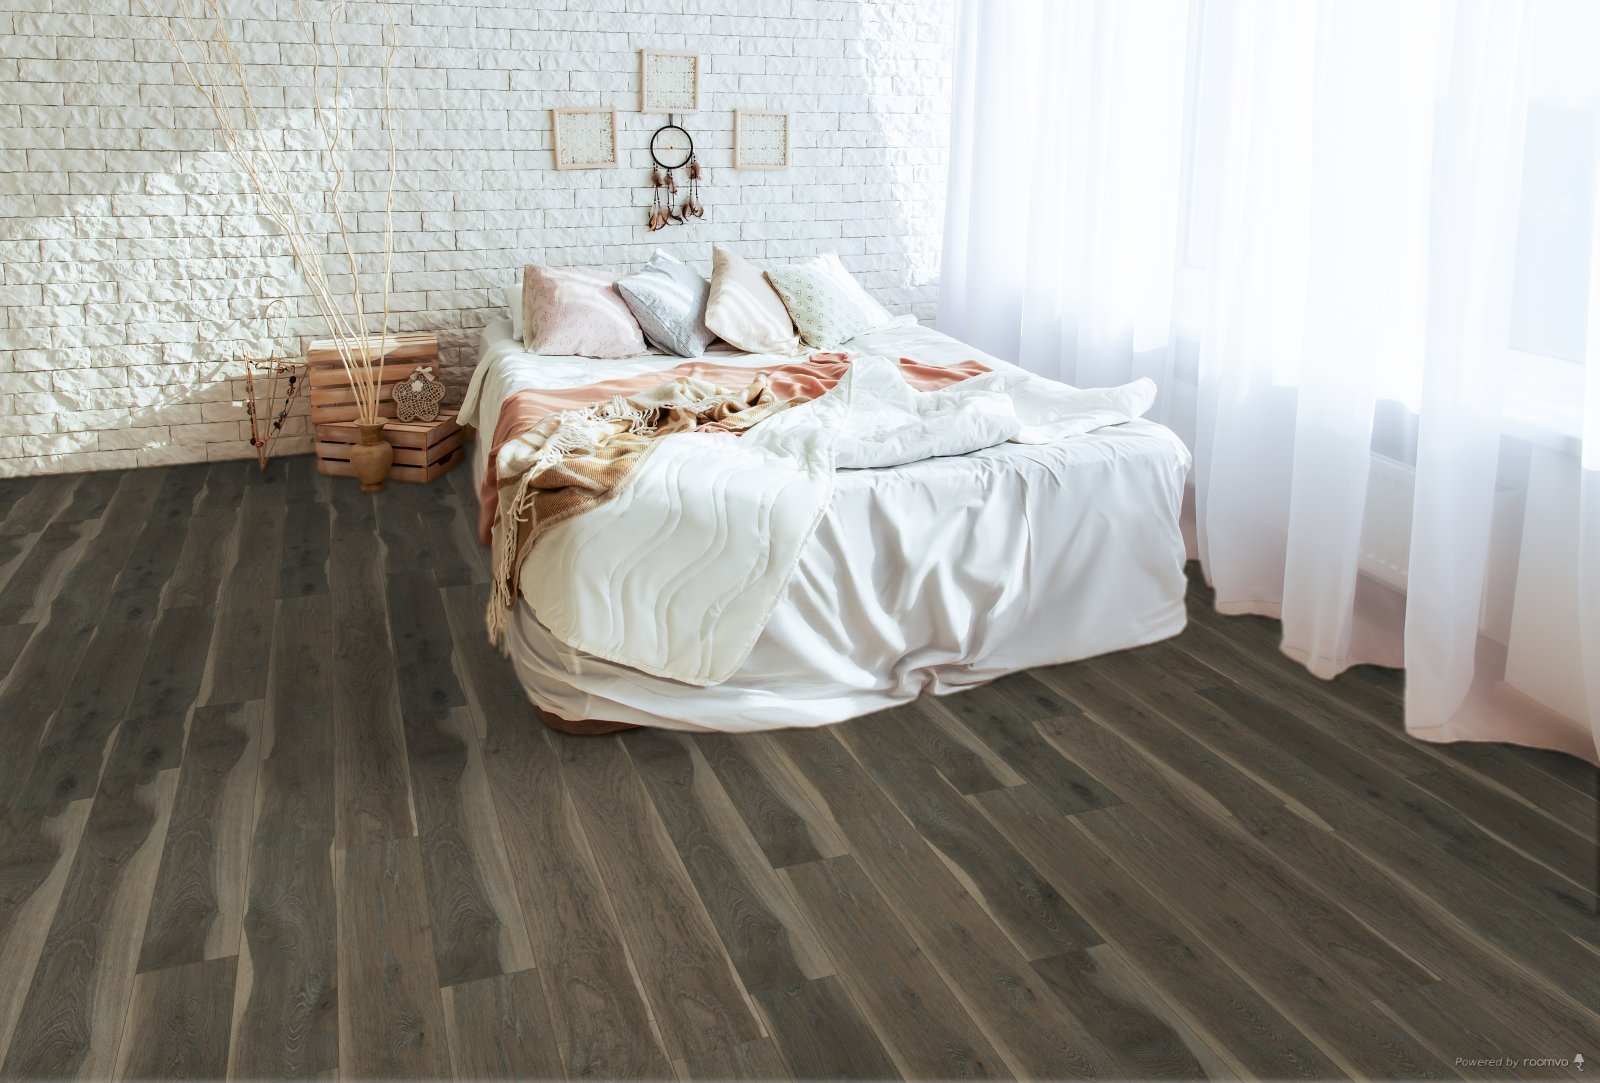 Horizen Flooring presents to you a picture of a quality wide plank Clater Lake luxury vinyl plank. NovoCore Premium collection features a wide range of colors & designs that will compliment any interior. Natural wood grain synchronized surface allow for an authentic hardwood look & feel. This collection features a 0.25″ / 6.5 mm overall thickness and a durable 22 mil / 0.55 mm wear layer for residential and commercial applications.